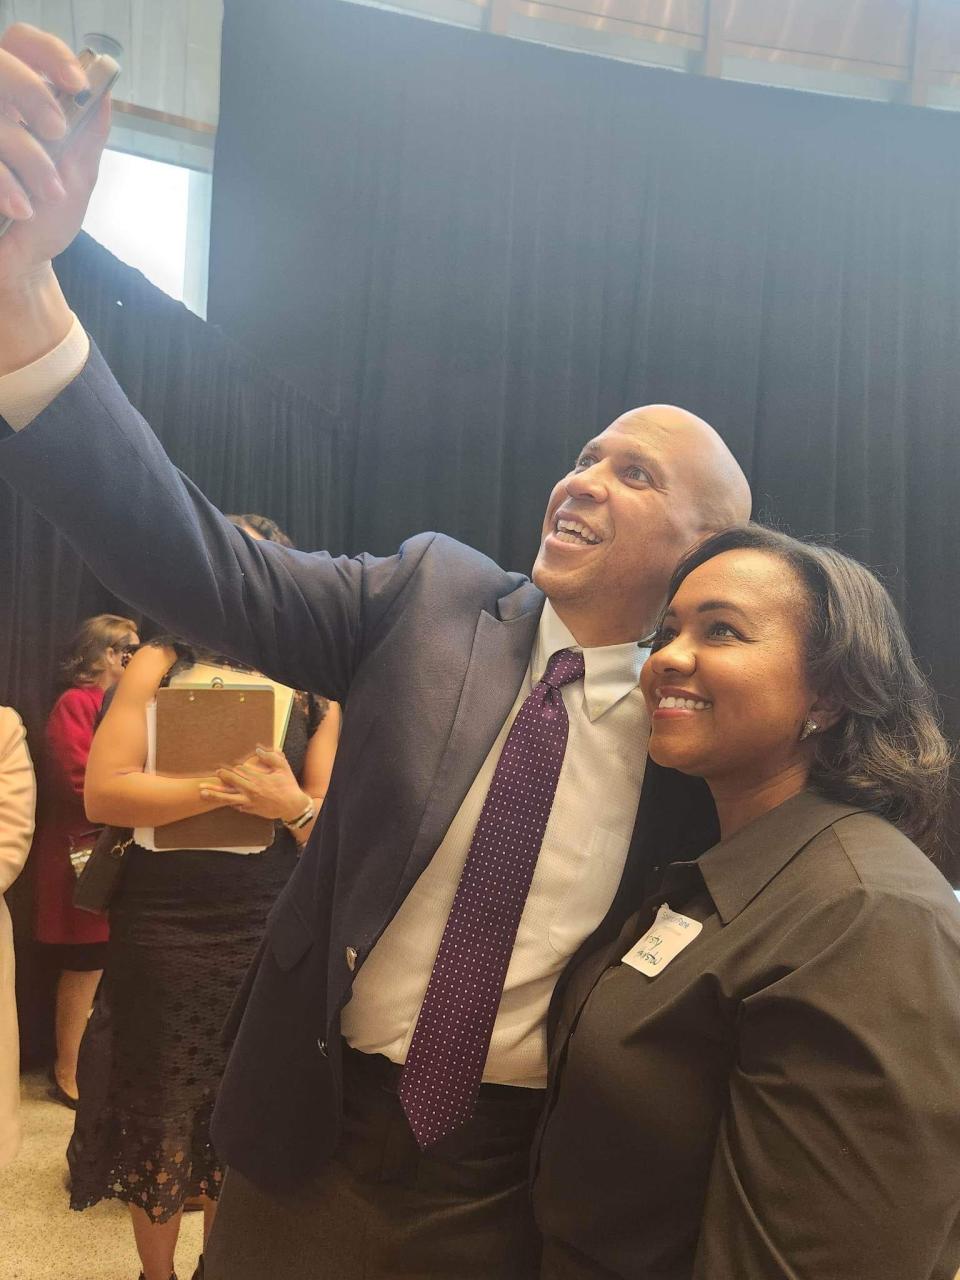 Senator Corey Booker (D-New Jersey) takes a selfie with Kristy Hairston at the 22nd annual Martin Luther King Jr. Breakfast.